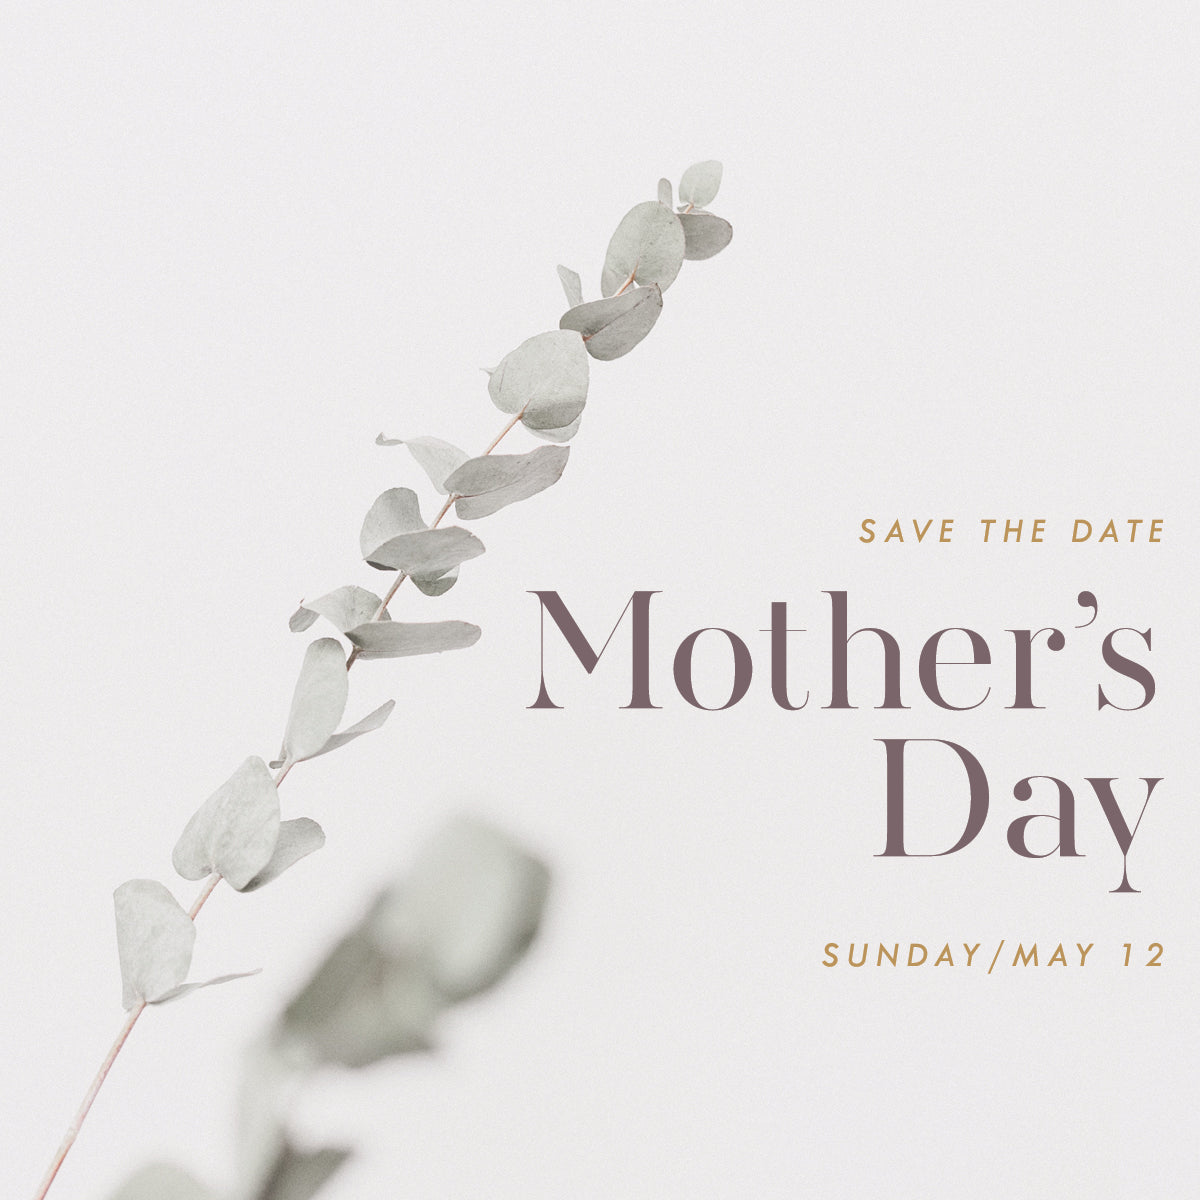 Mother's Day Gift Guide 2019